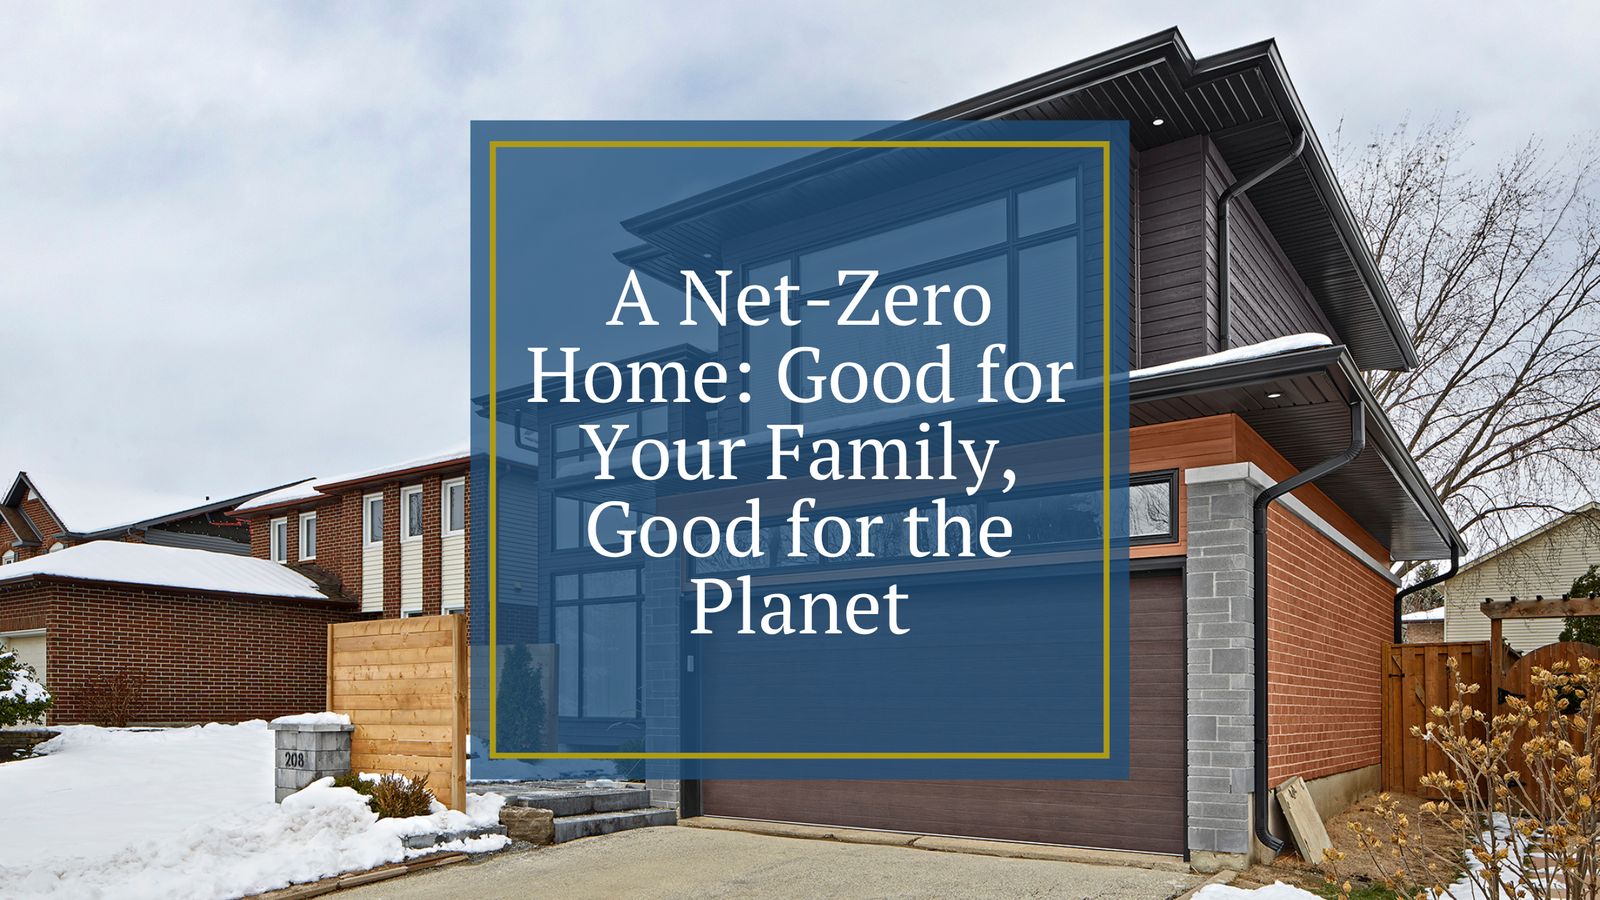 A Net-Zero Home: Good for Your Family, Good for the Planet